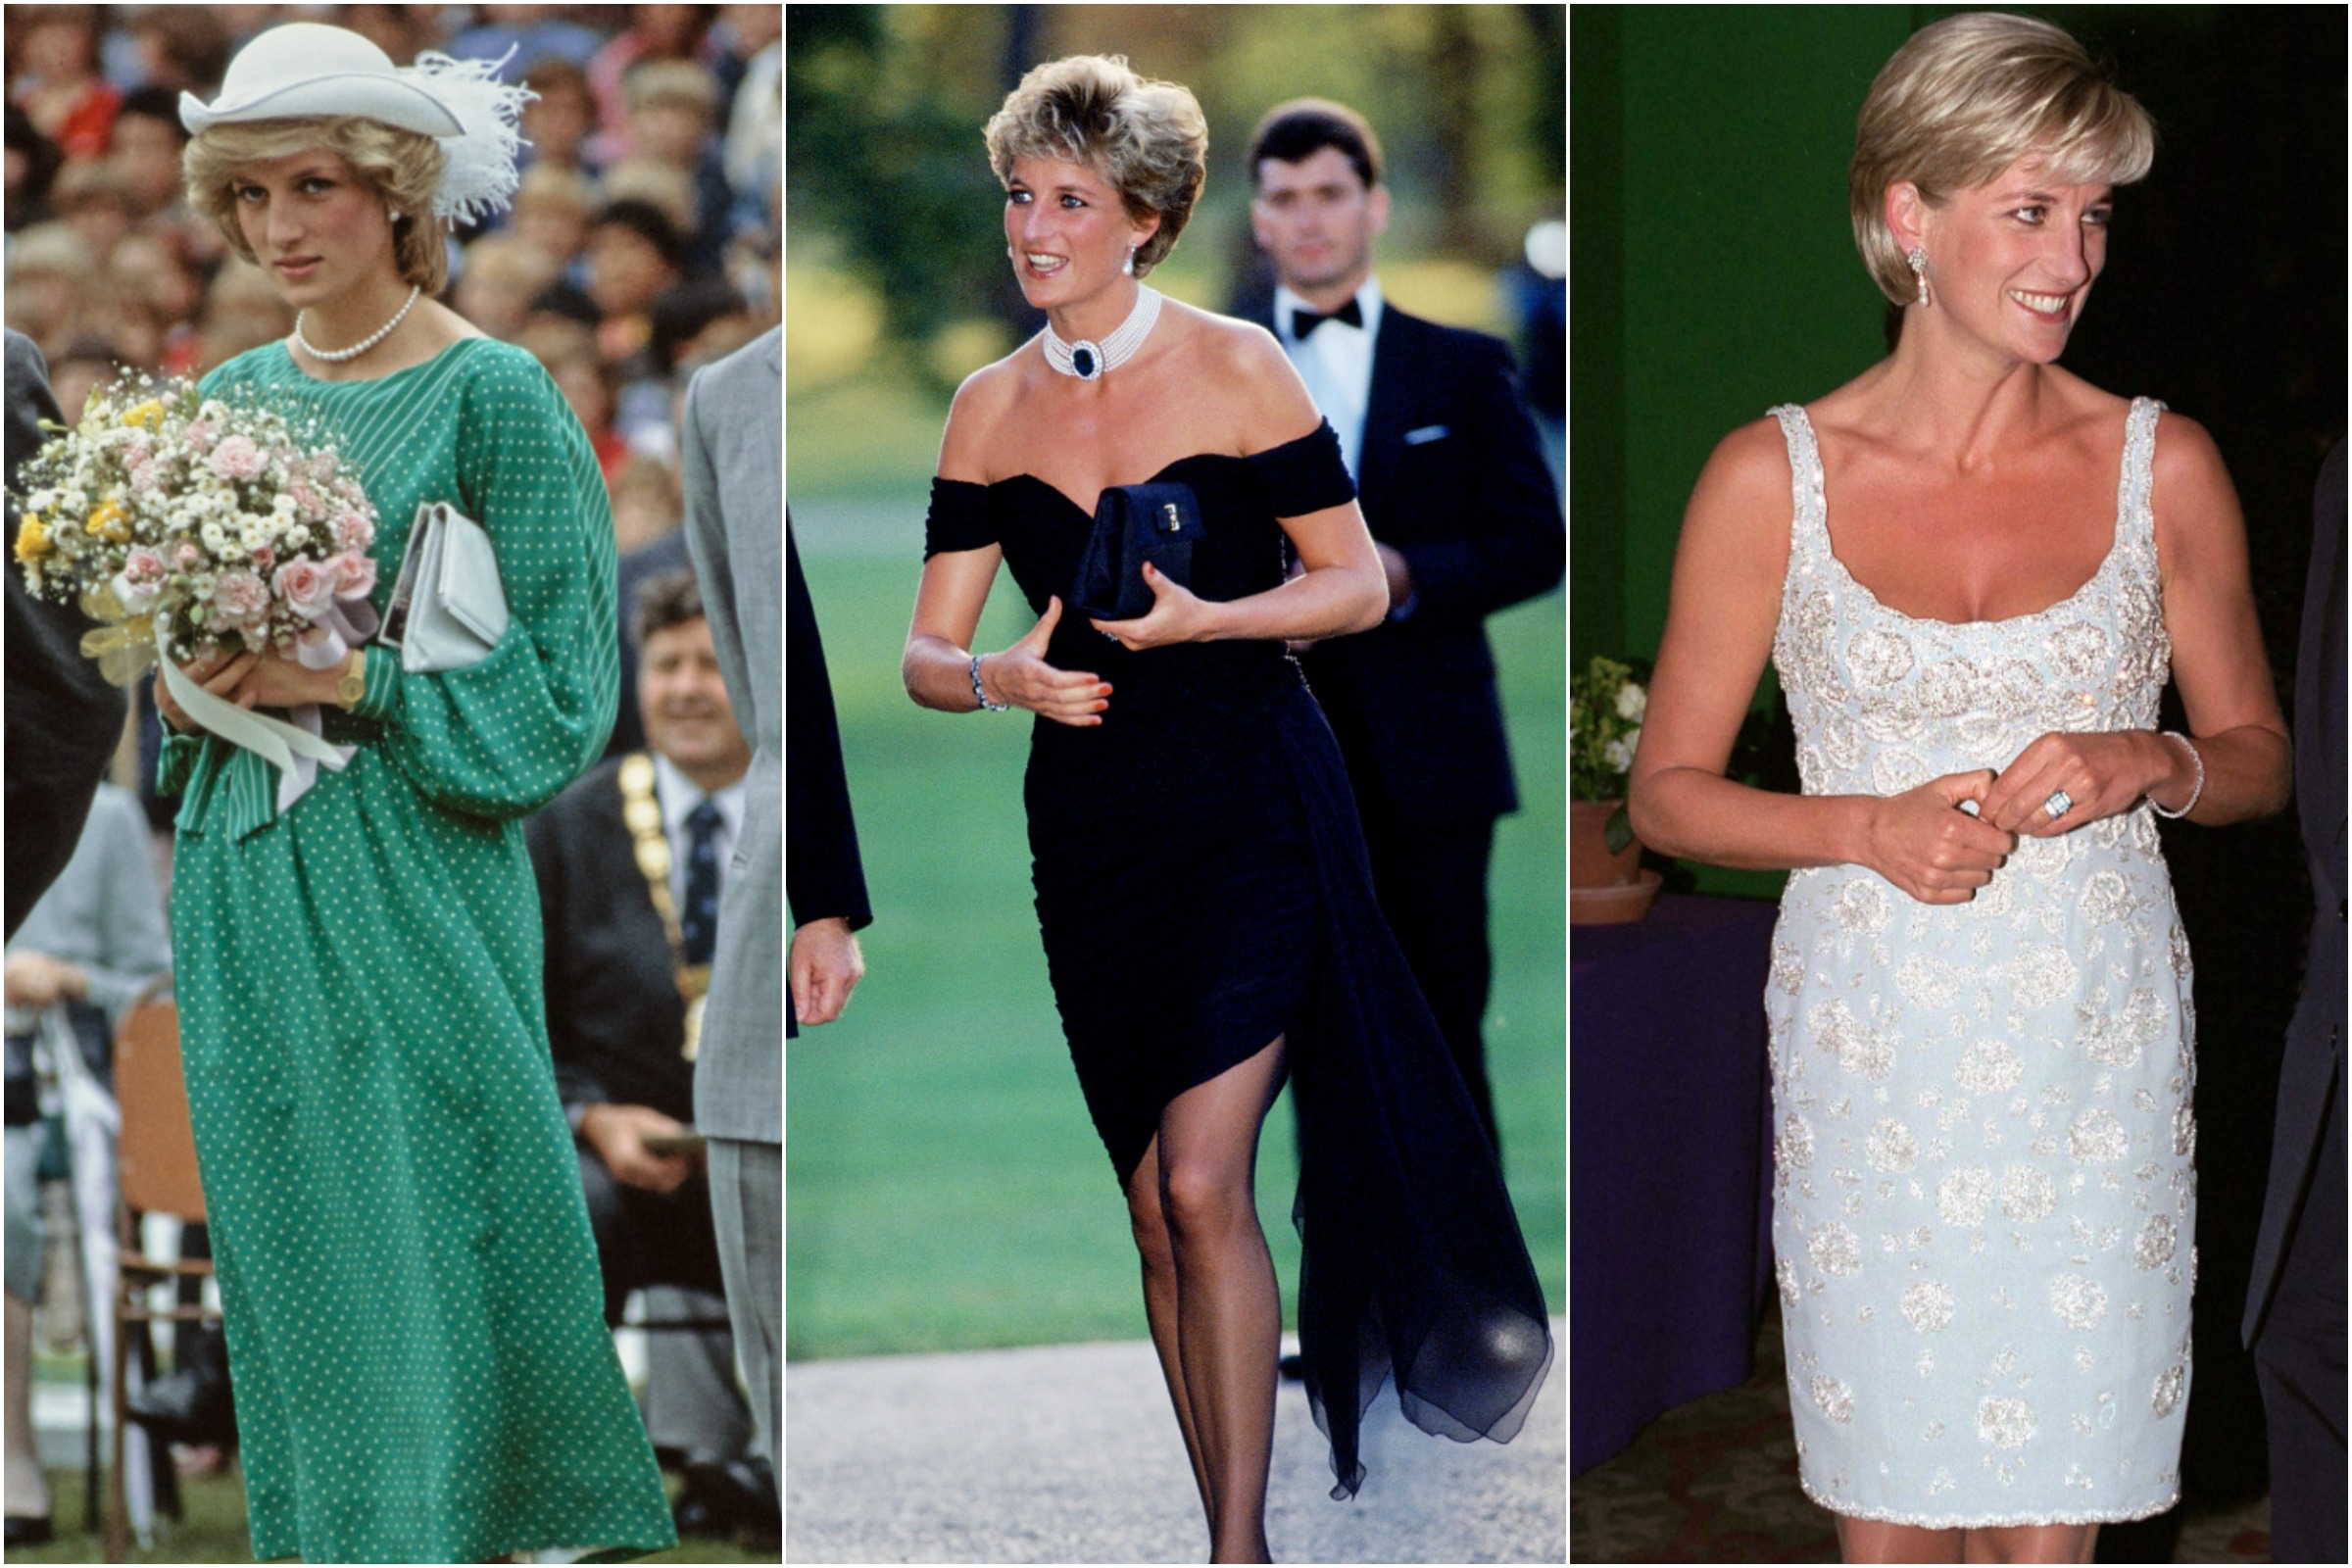 How Princess Diana’s Skirts Acted as a ‘Barometer’ For Her Altering Life